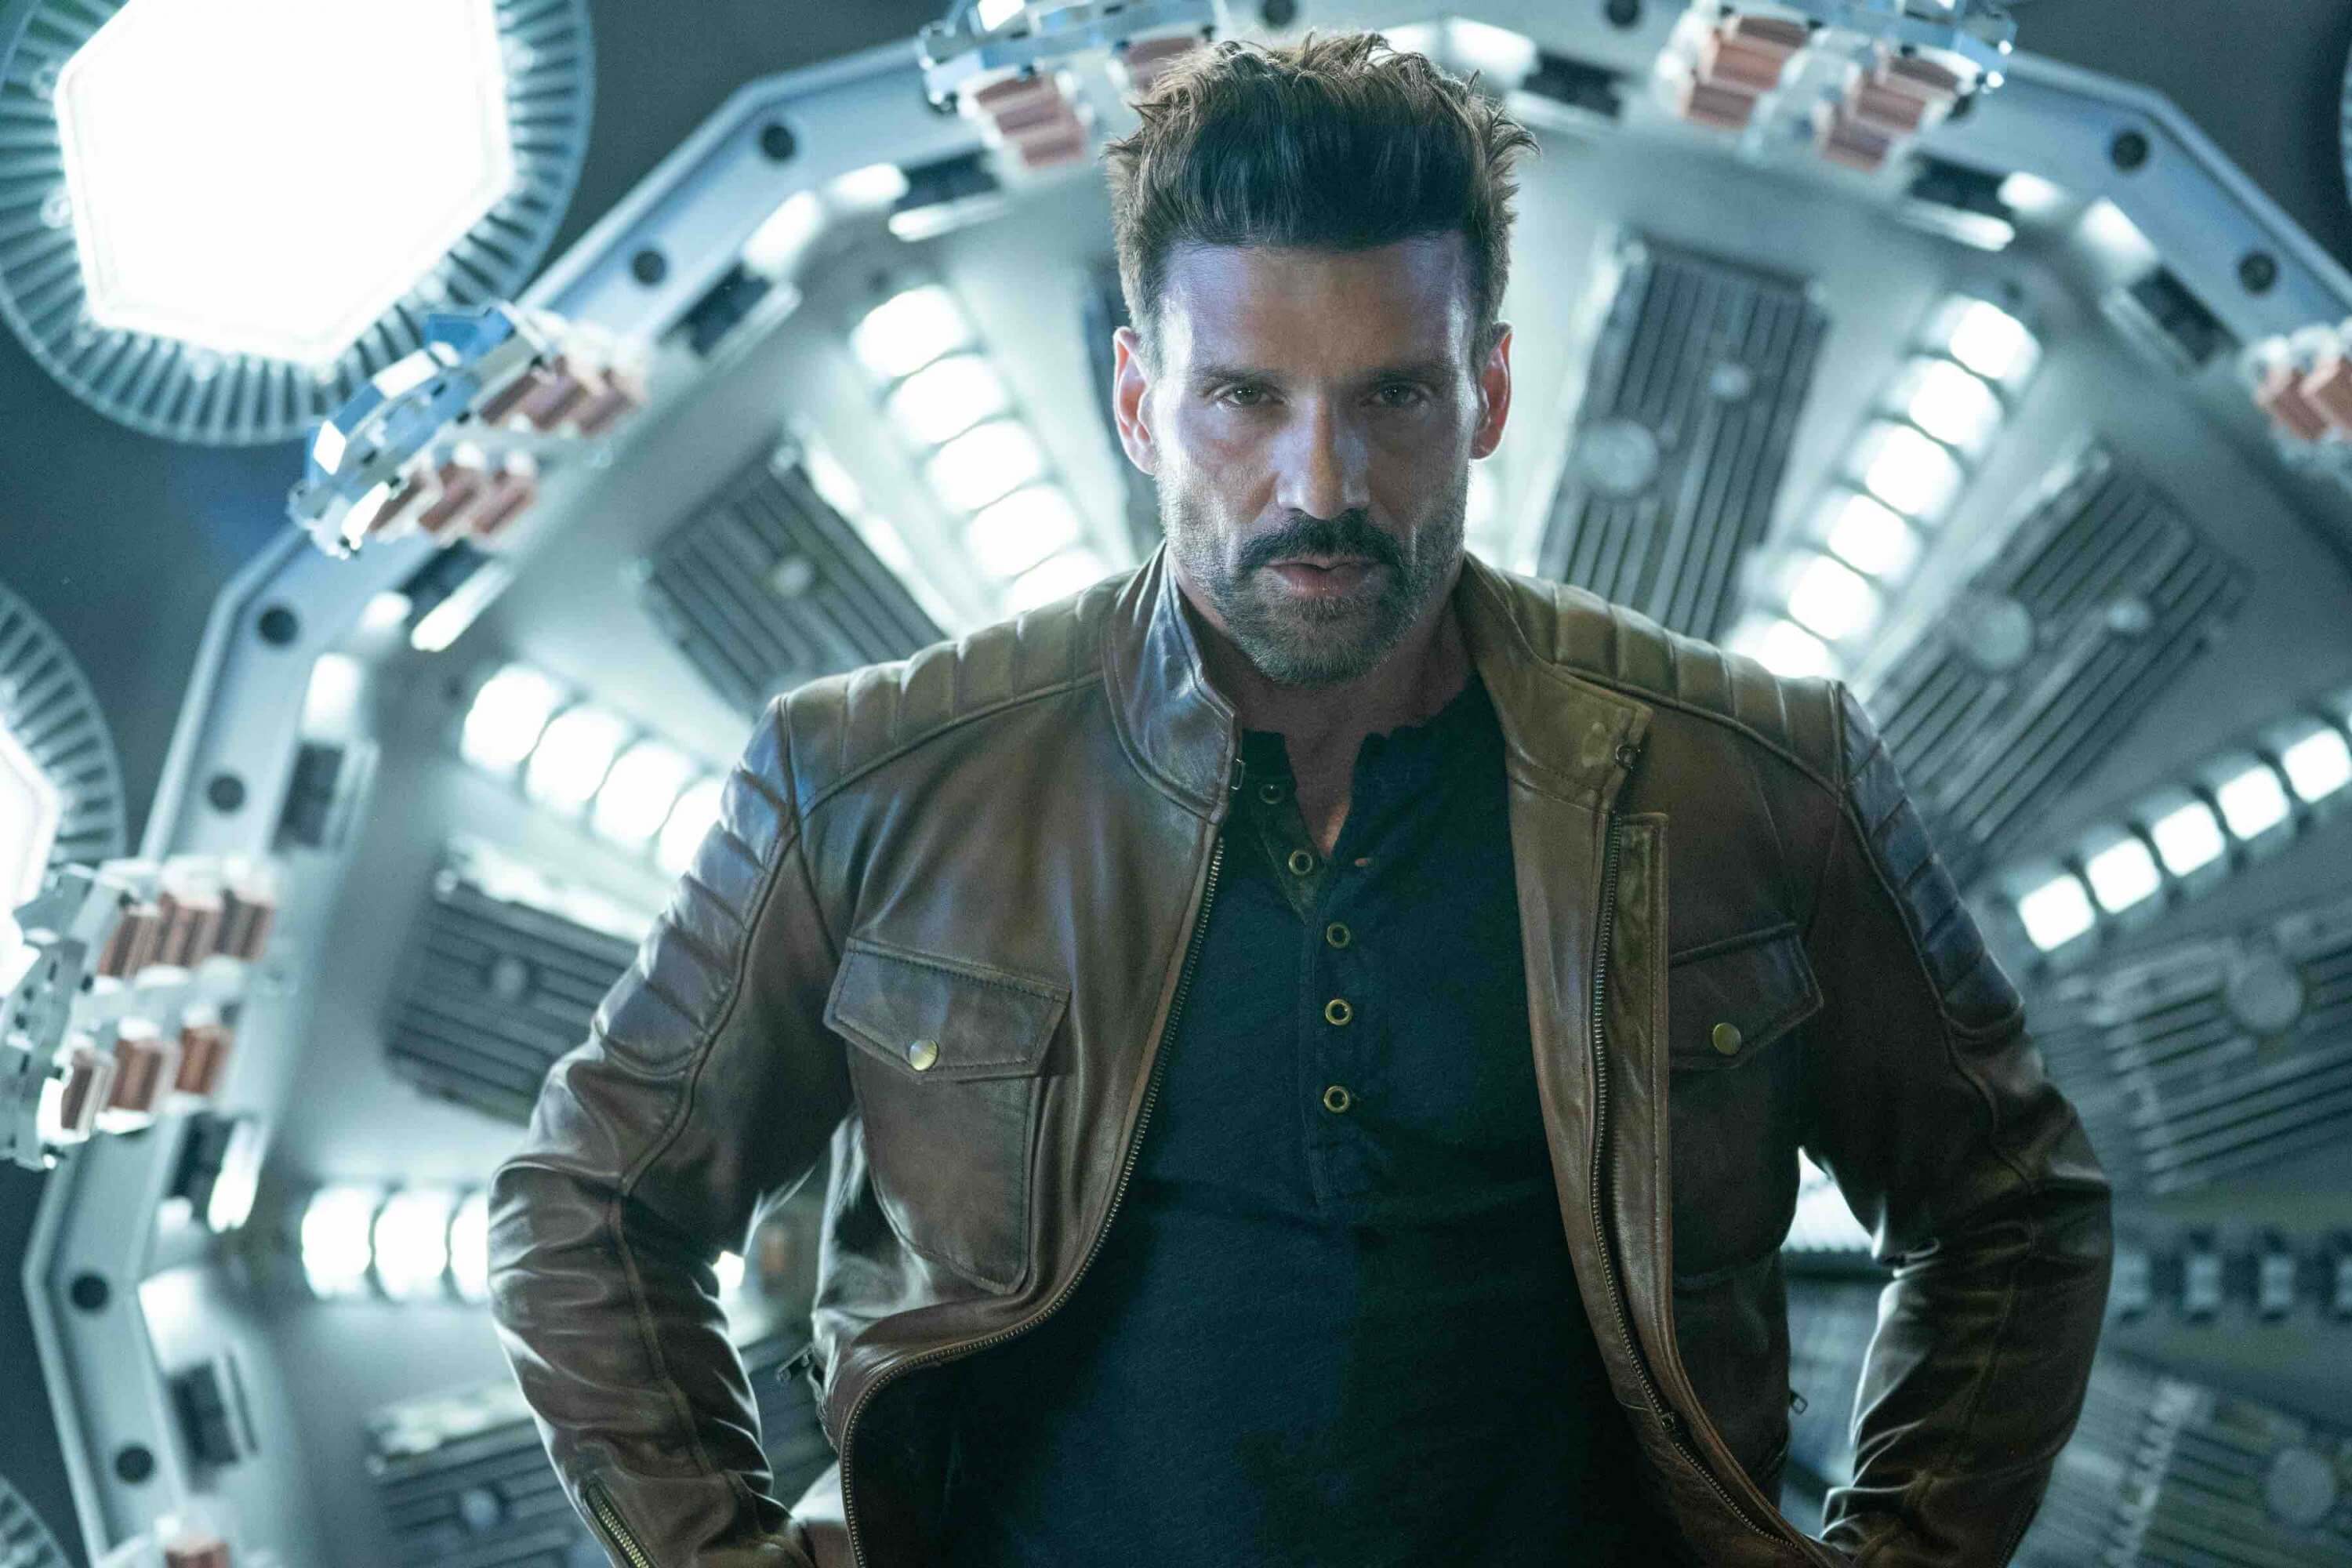 Frank Grillo cast as The Dagon lead - still from Boss Level